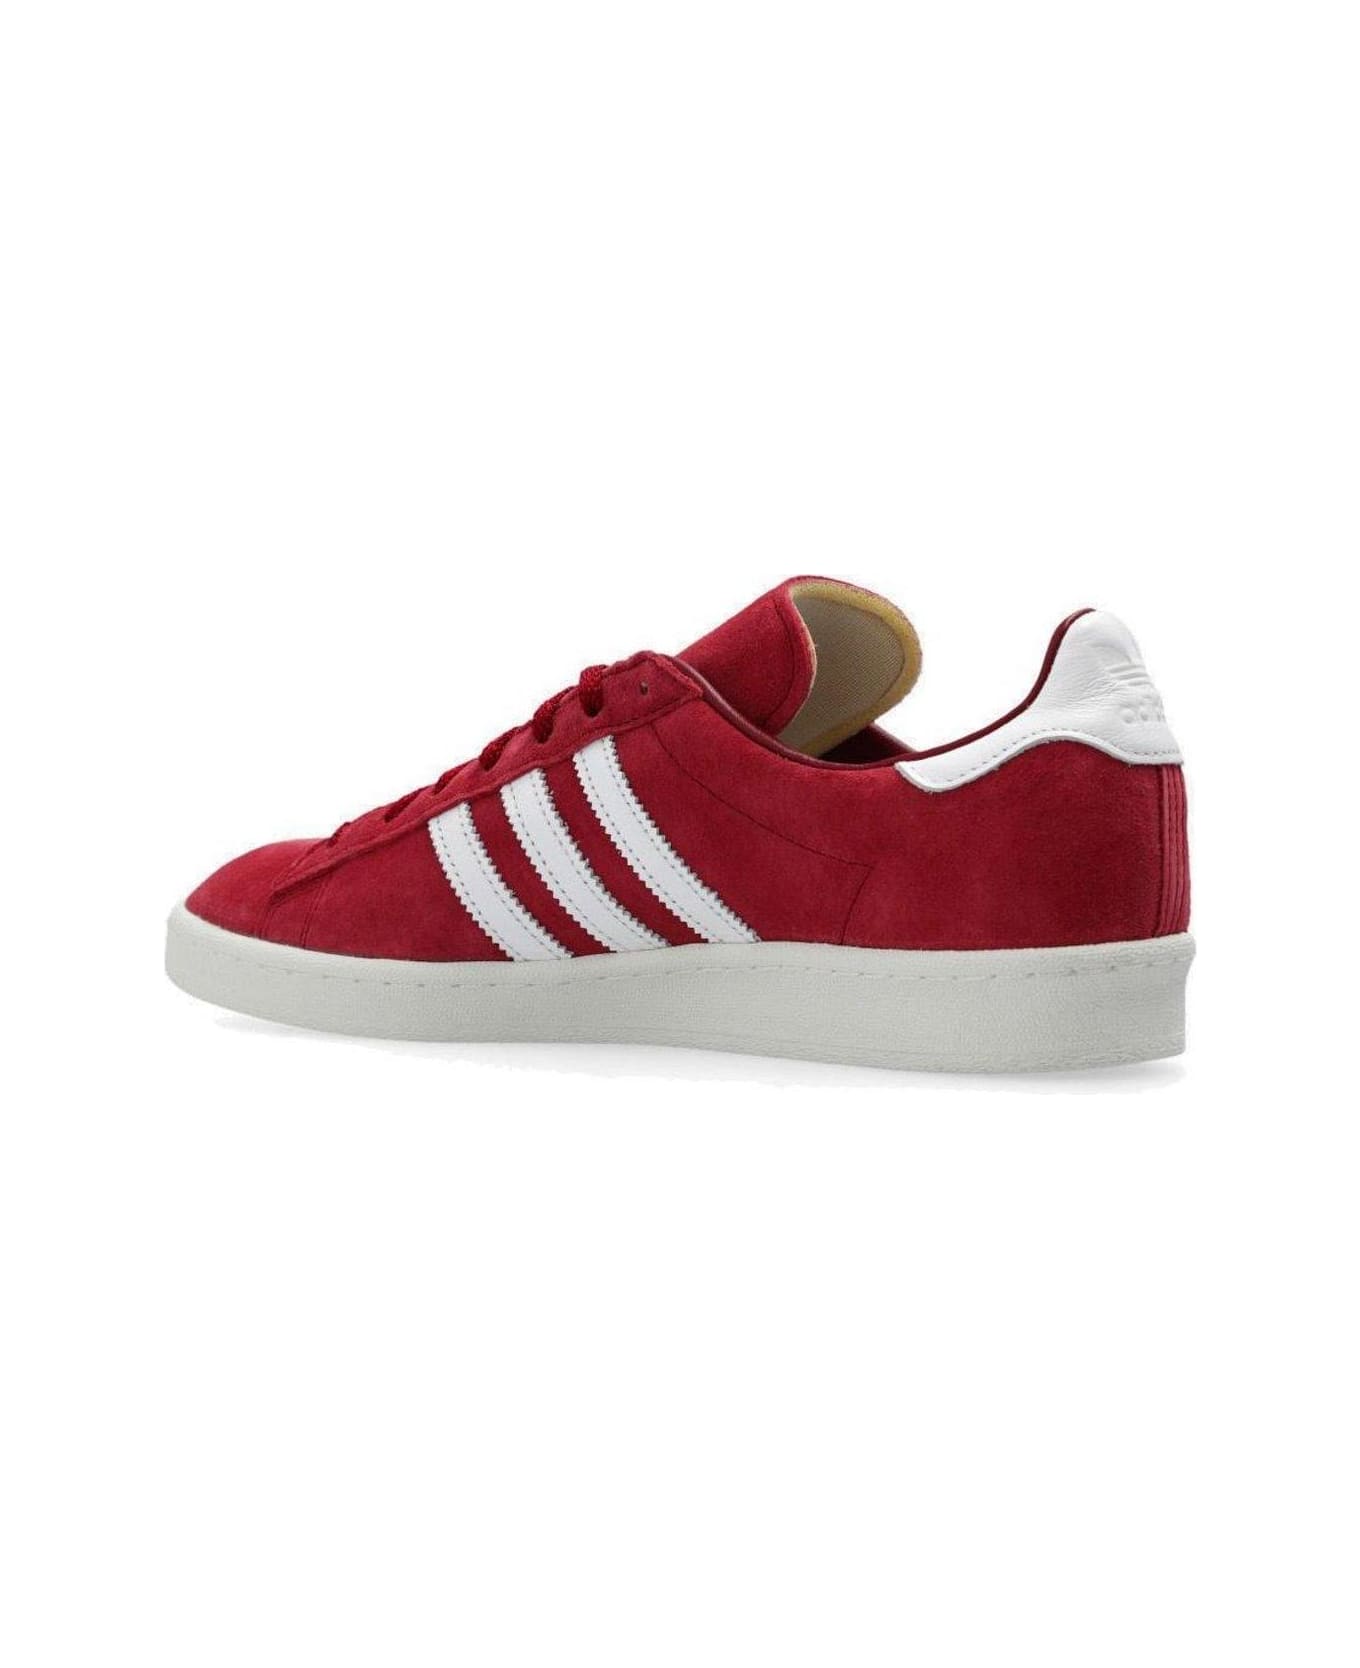 Adidas Campus 80s Lace-up Sneakers - BORDEAUX